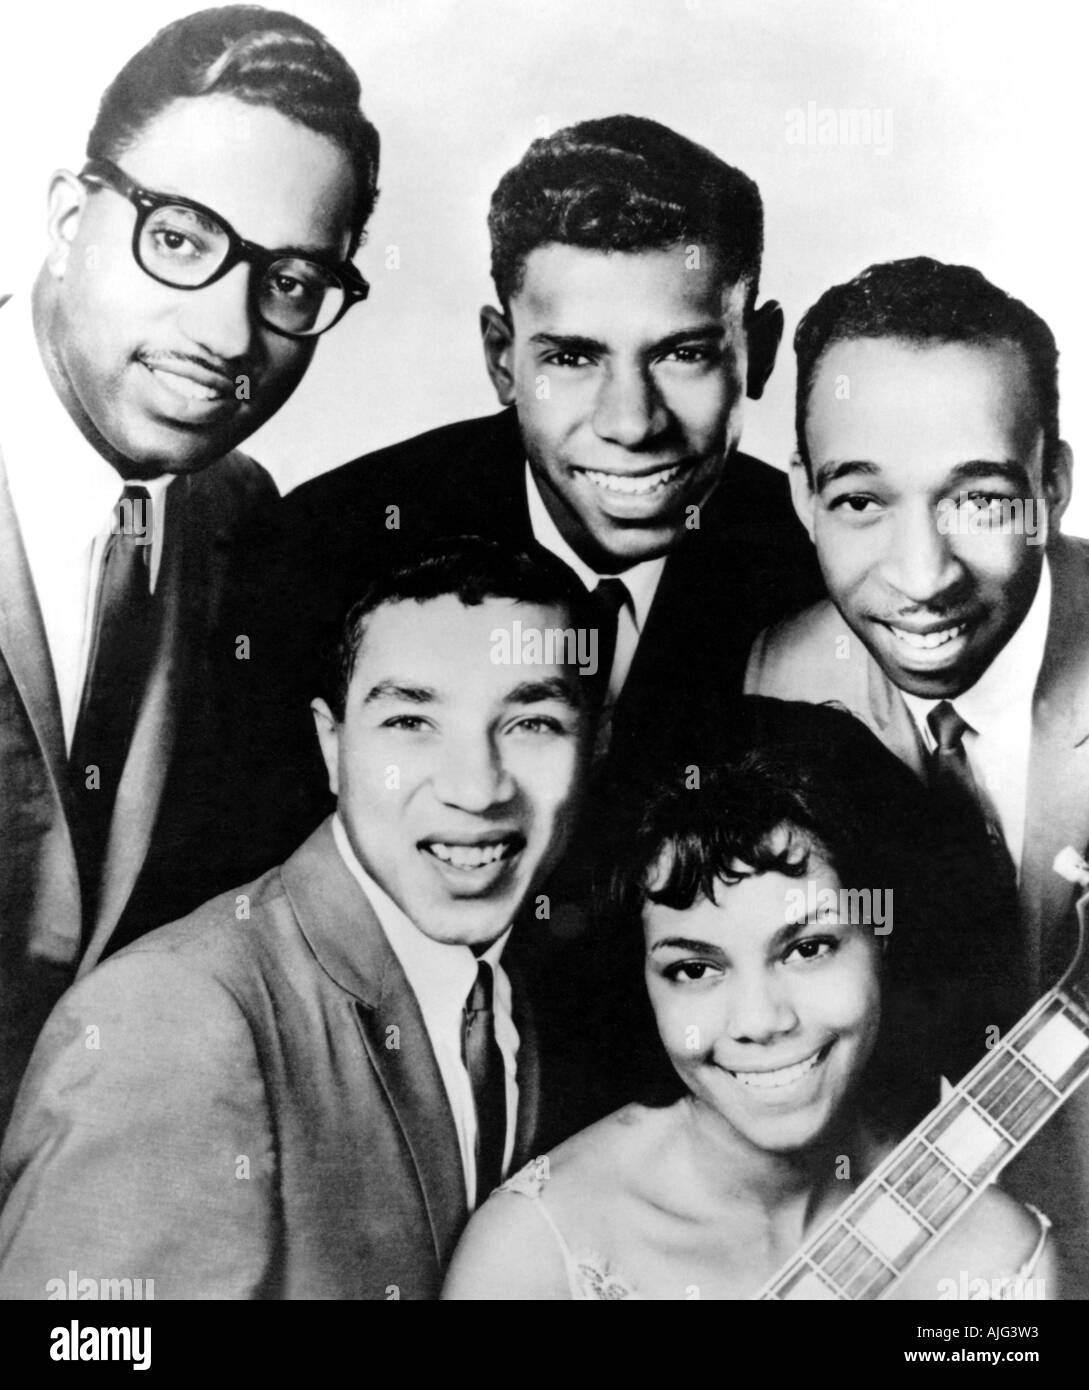 SMOKEY ROBINSON AND THE MIRACLES about 1957 - see Description below Stock Photo